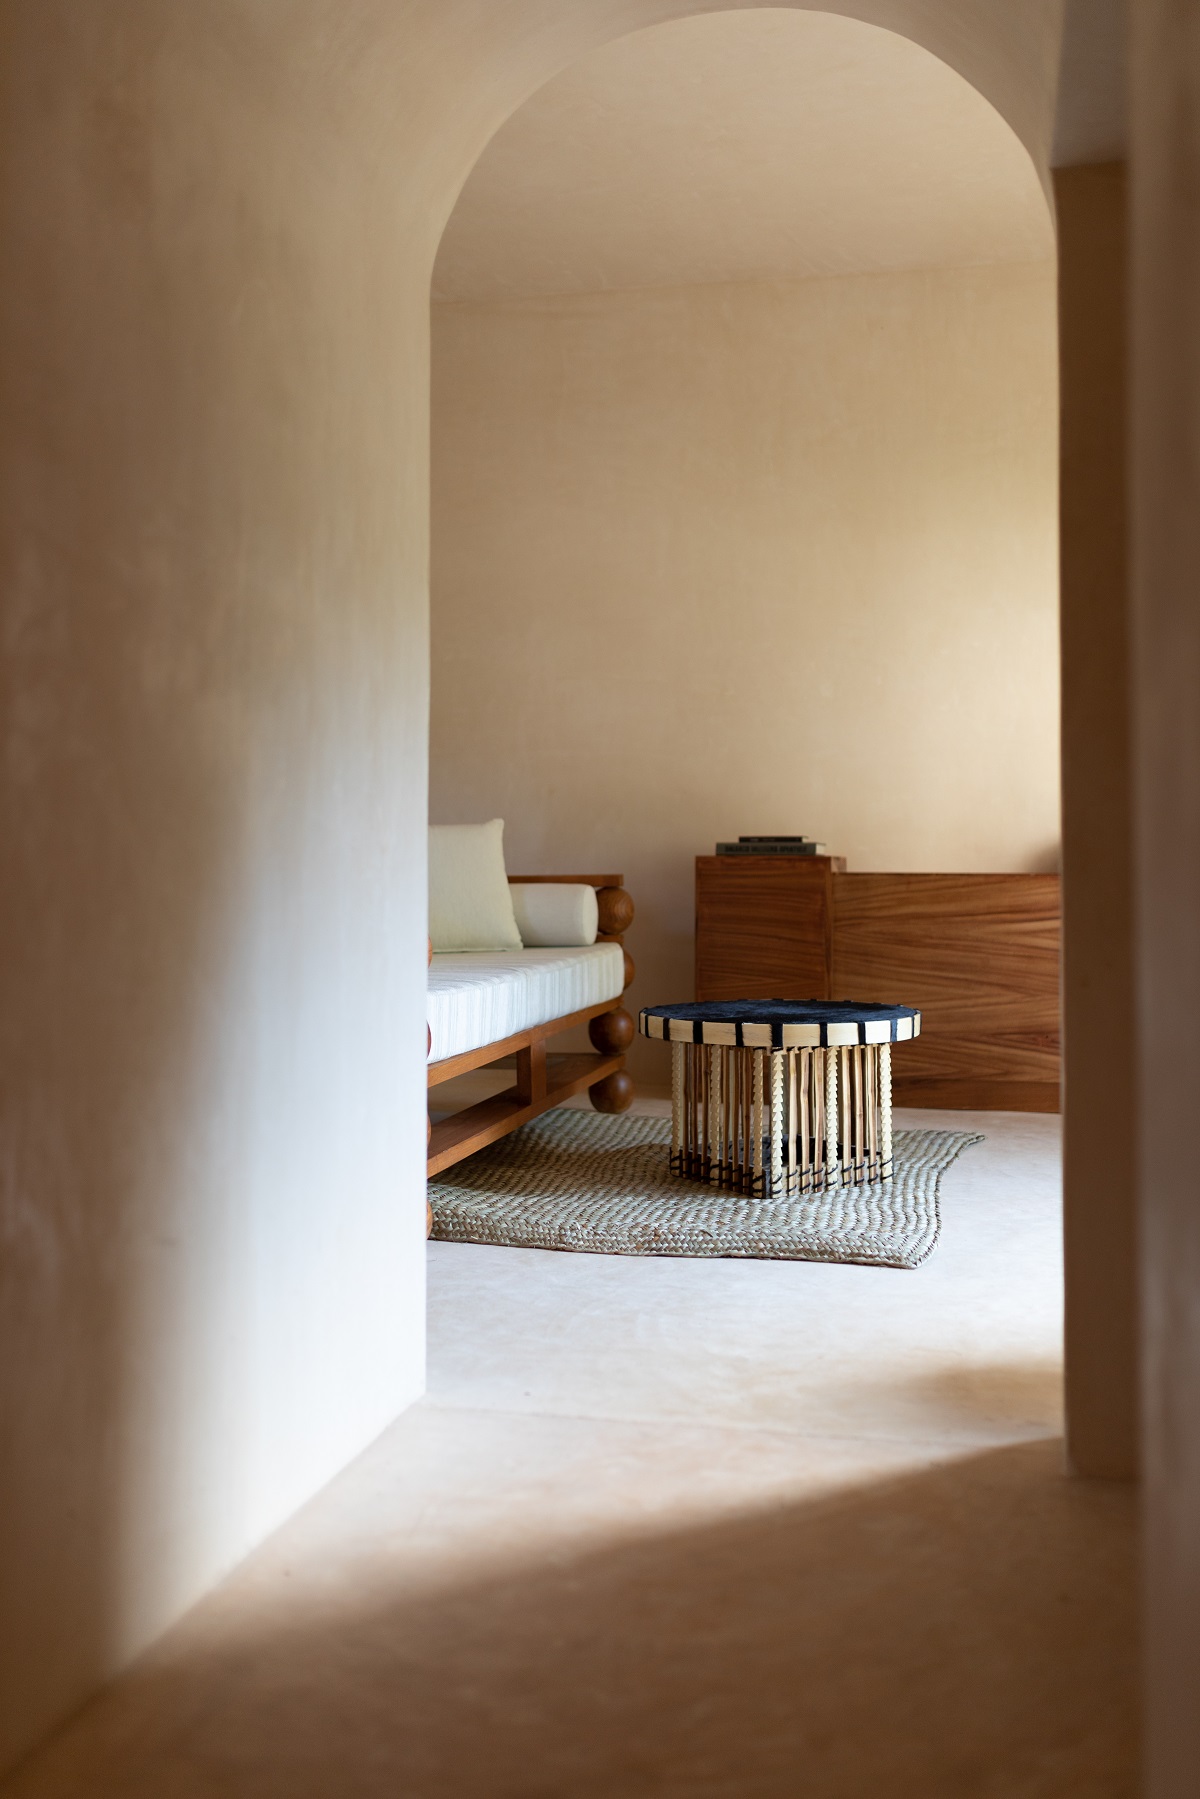 natural plaster forming an organic arched doorway with a view onto handcrafted table and chair